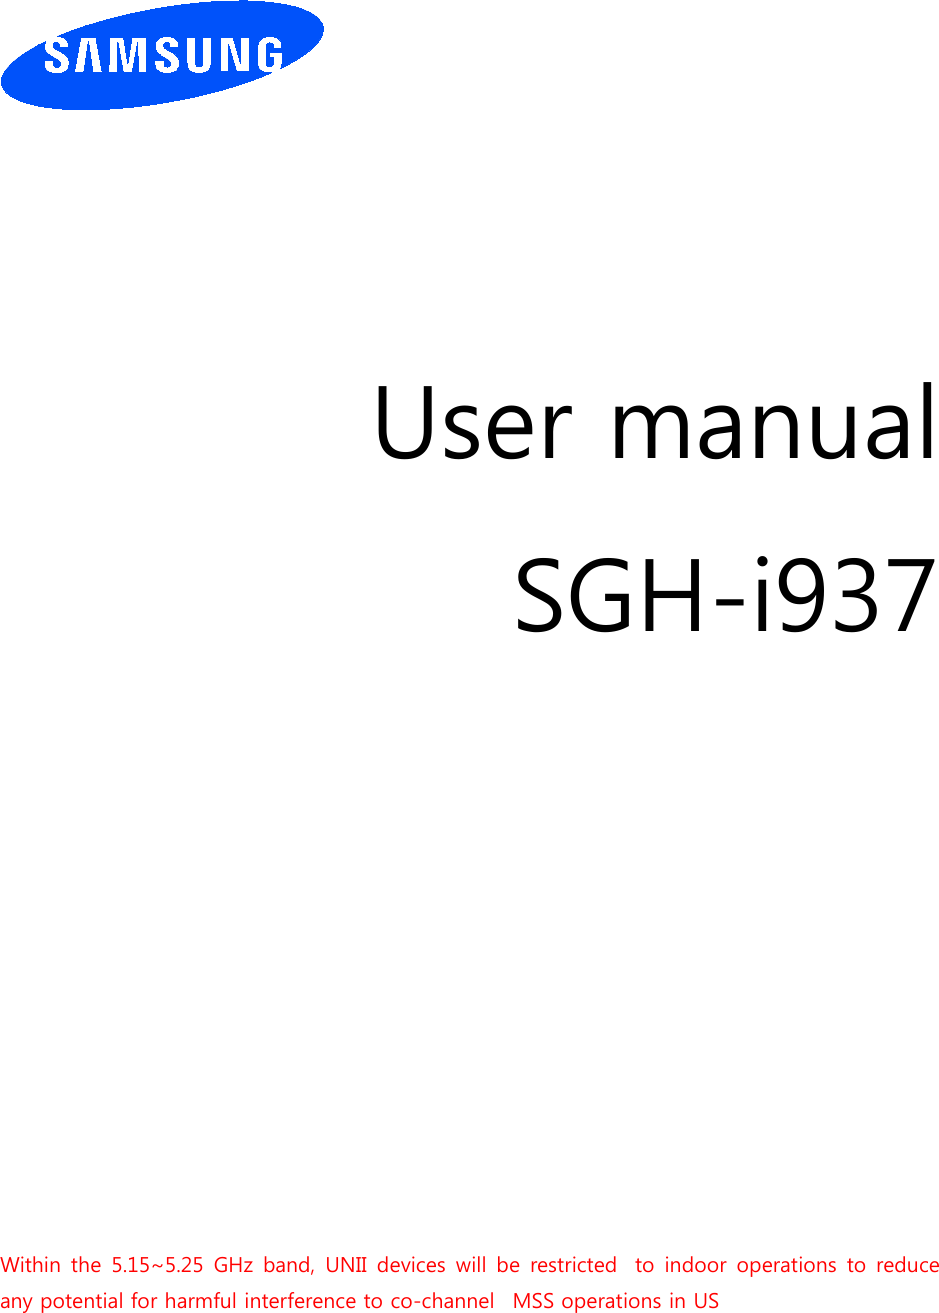          User manual SGH-i937             Within the 5.15~5.25 GHz band, UNII devices will be restricted   to indoor operations to reduce any potential for harmful interference to co-channel   MSS operations in US 